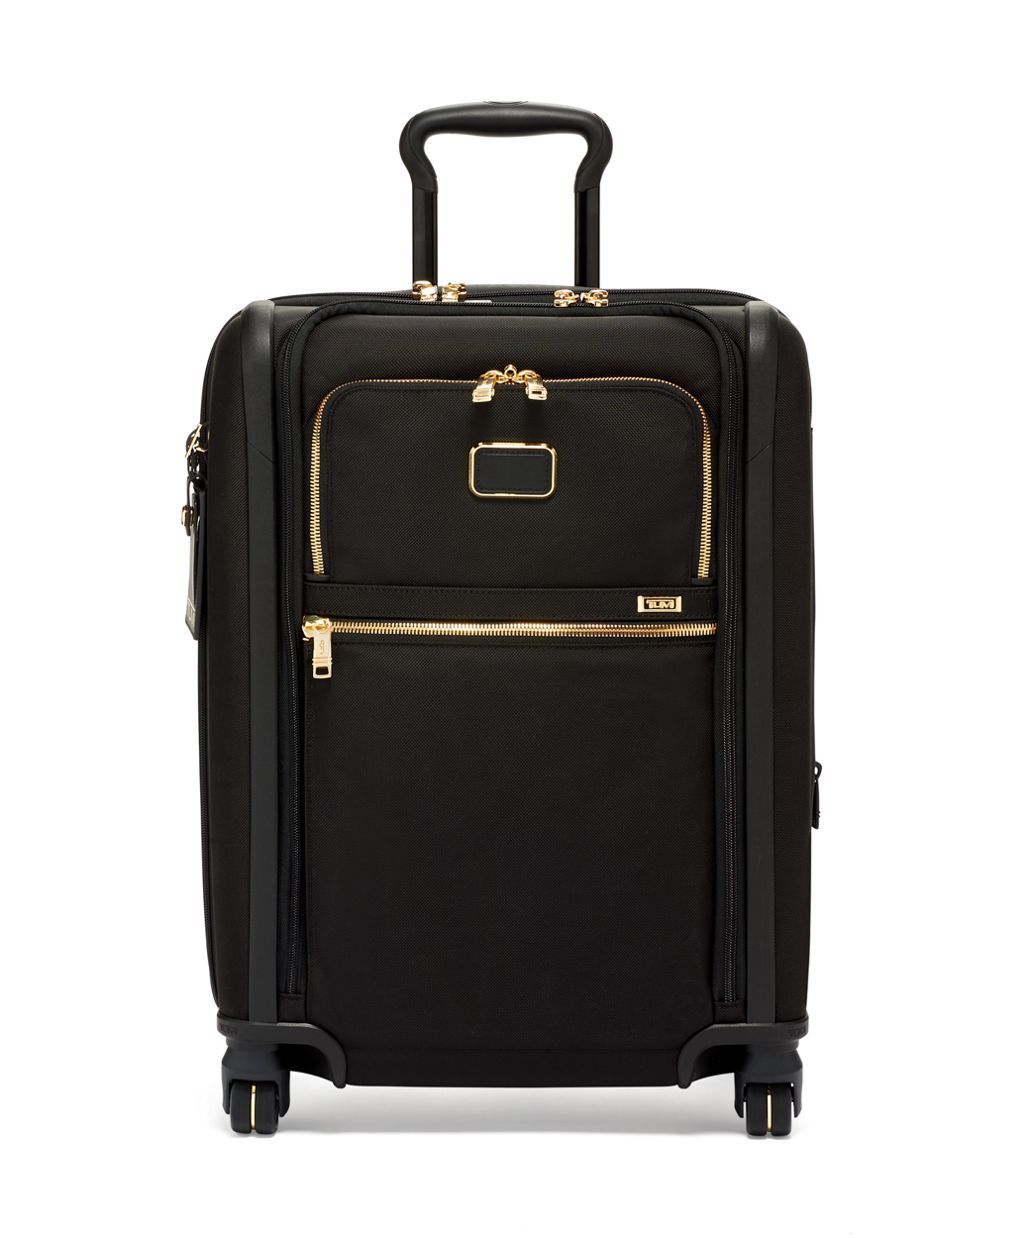 Continental Dual Access 4 Wheeled Carry-On | Tumi